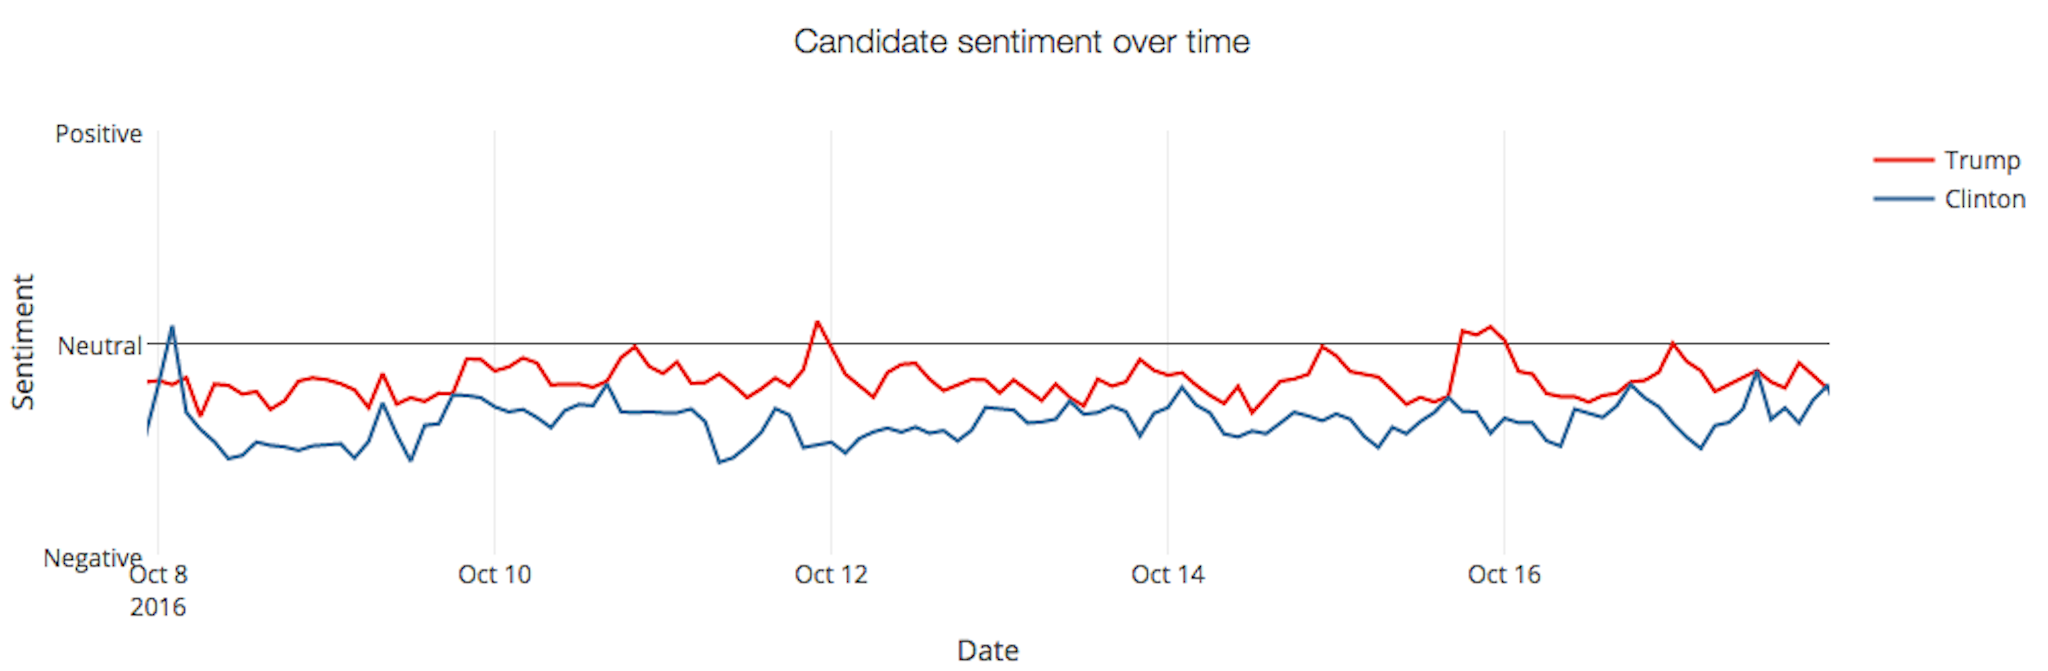 Sentiment analysis in Twitter, taking the example of Donald Trump and Hillary Clinton